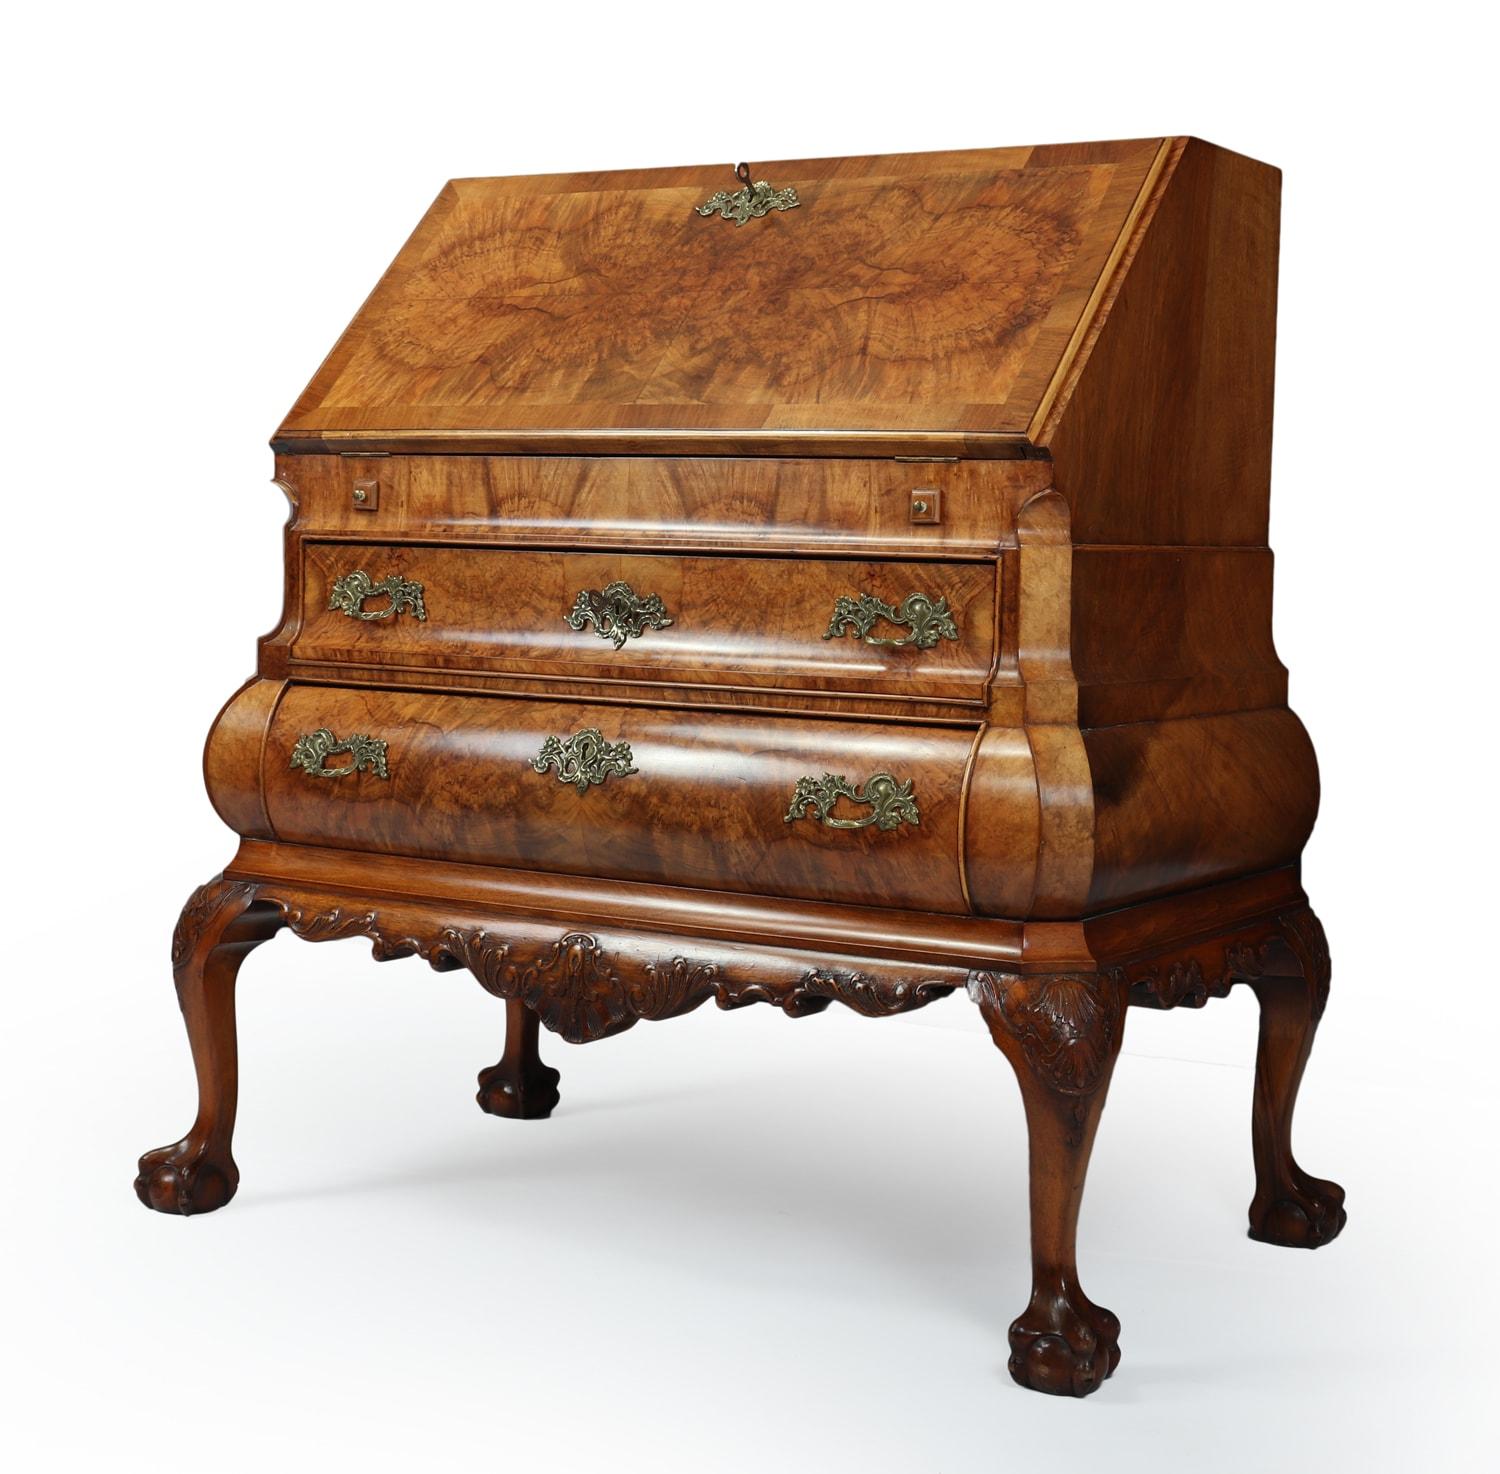 Dutch Bombe Bureau in walnut
A fine quality Dutch bombe Bureau produced in the first quarter of the twentieth century from solid walnut and oak and stunning burr and figured walnut veneers, the bureau opens to reveal a fully fitted stepped interior